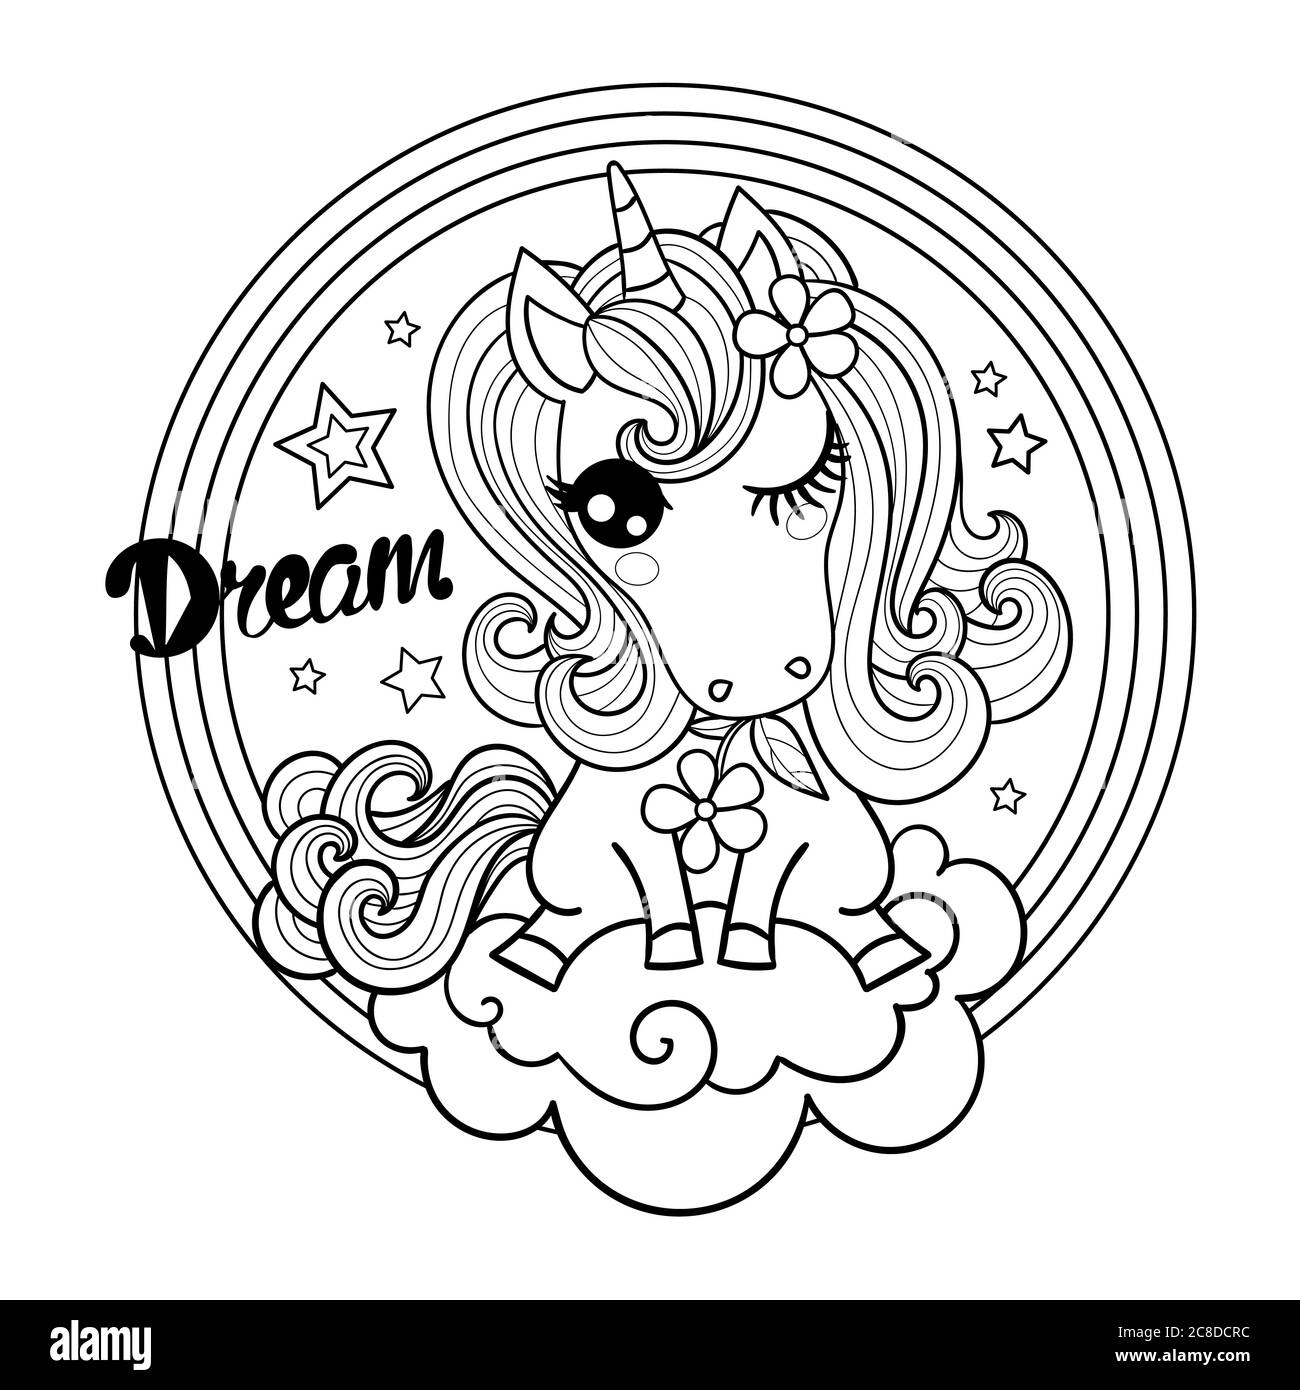 Dream. Cute unicorn on a cloud. Doodle vector illustration. Decorative frame. Circle composition. Black and white. For the design of prints, posters, Stock Vector